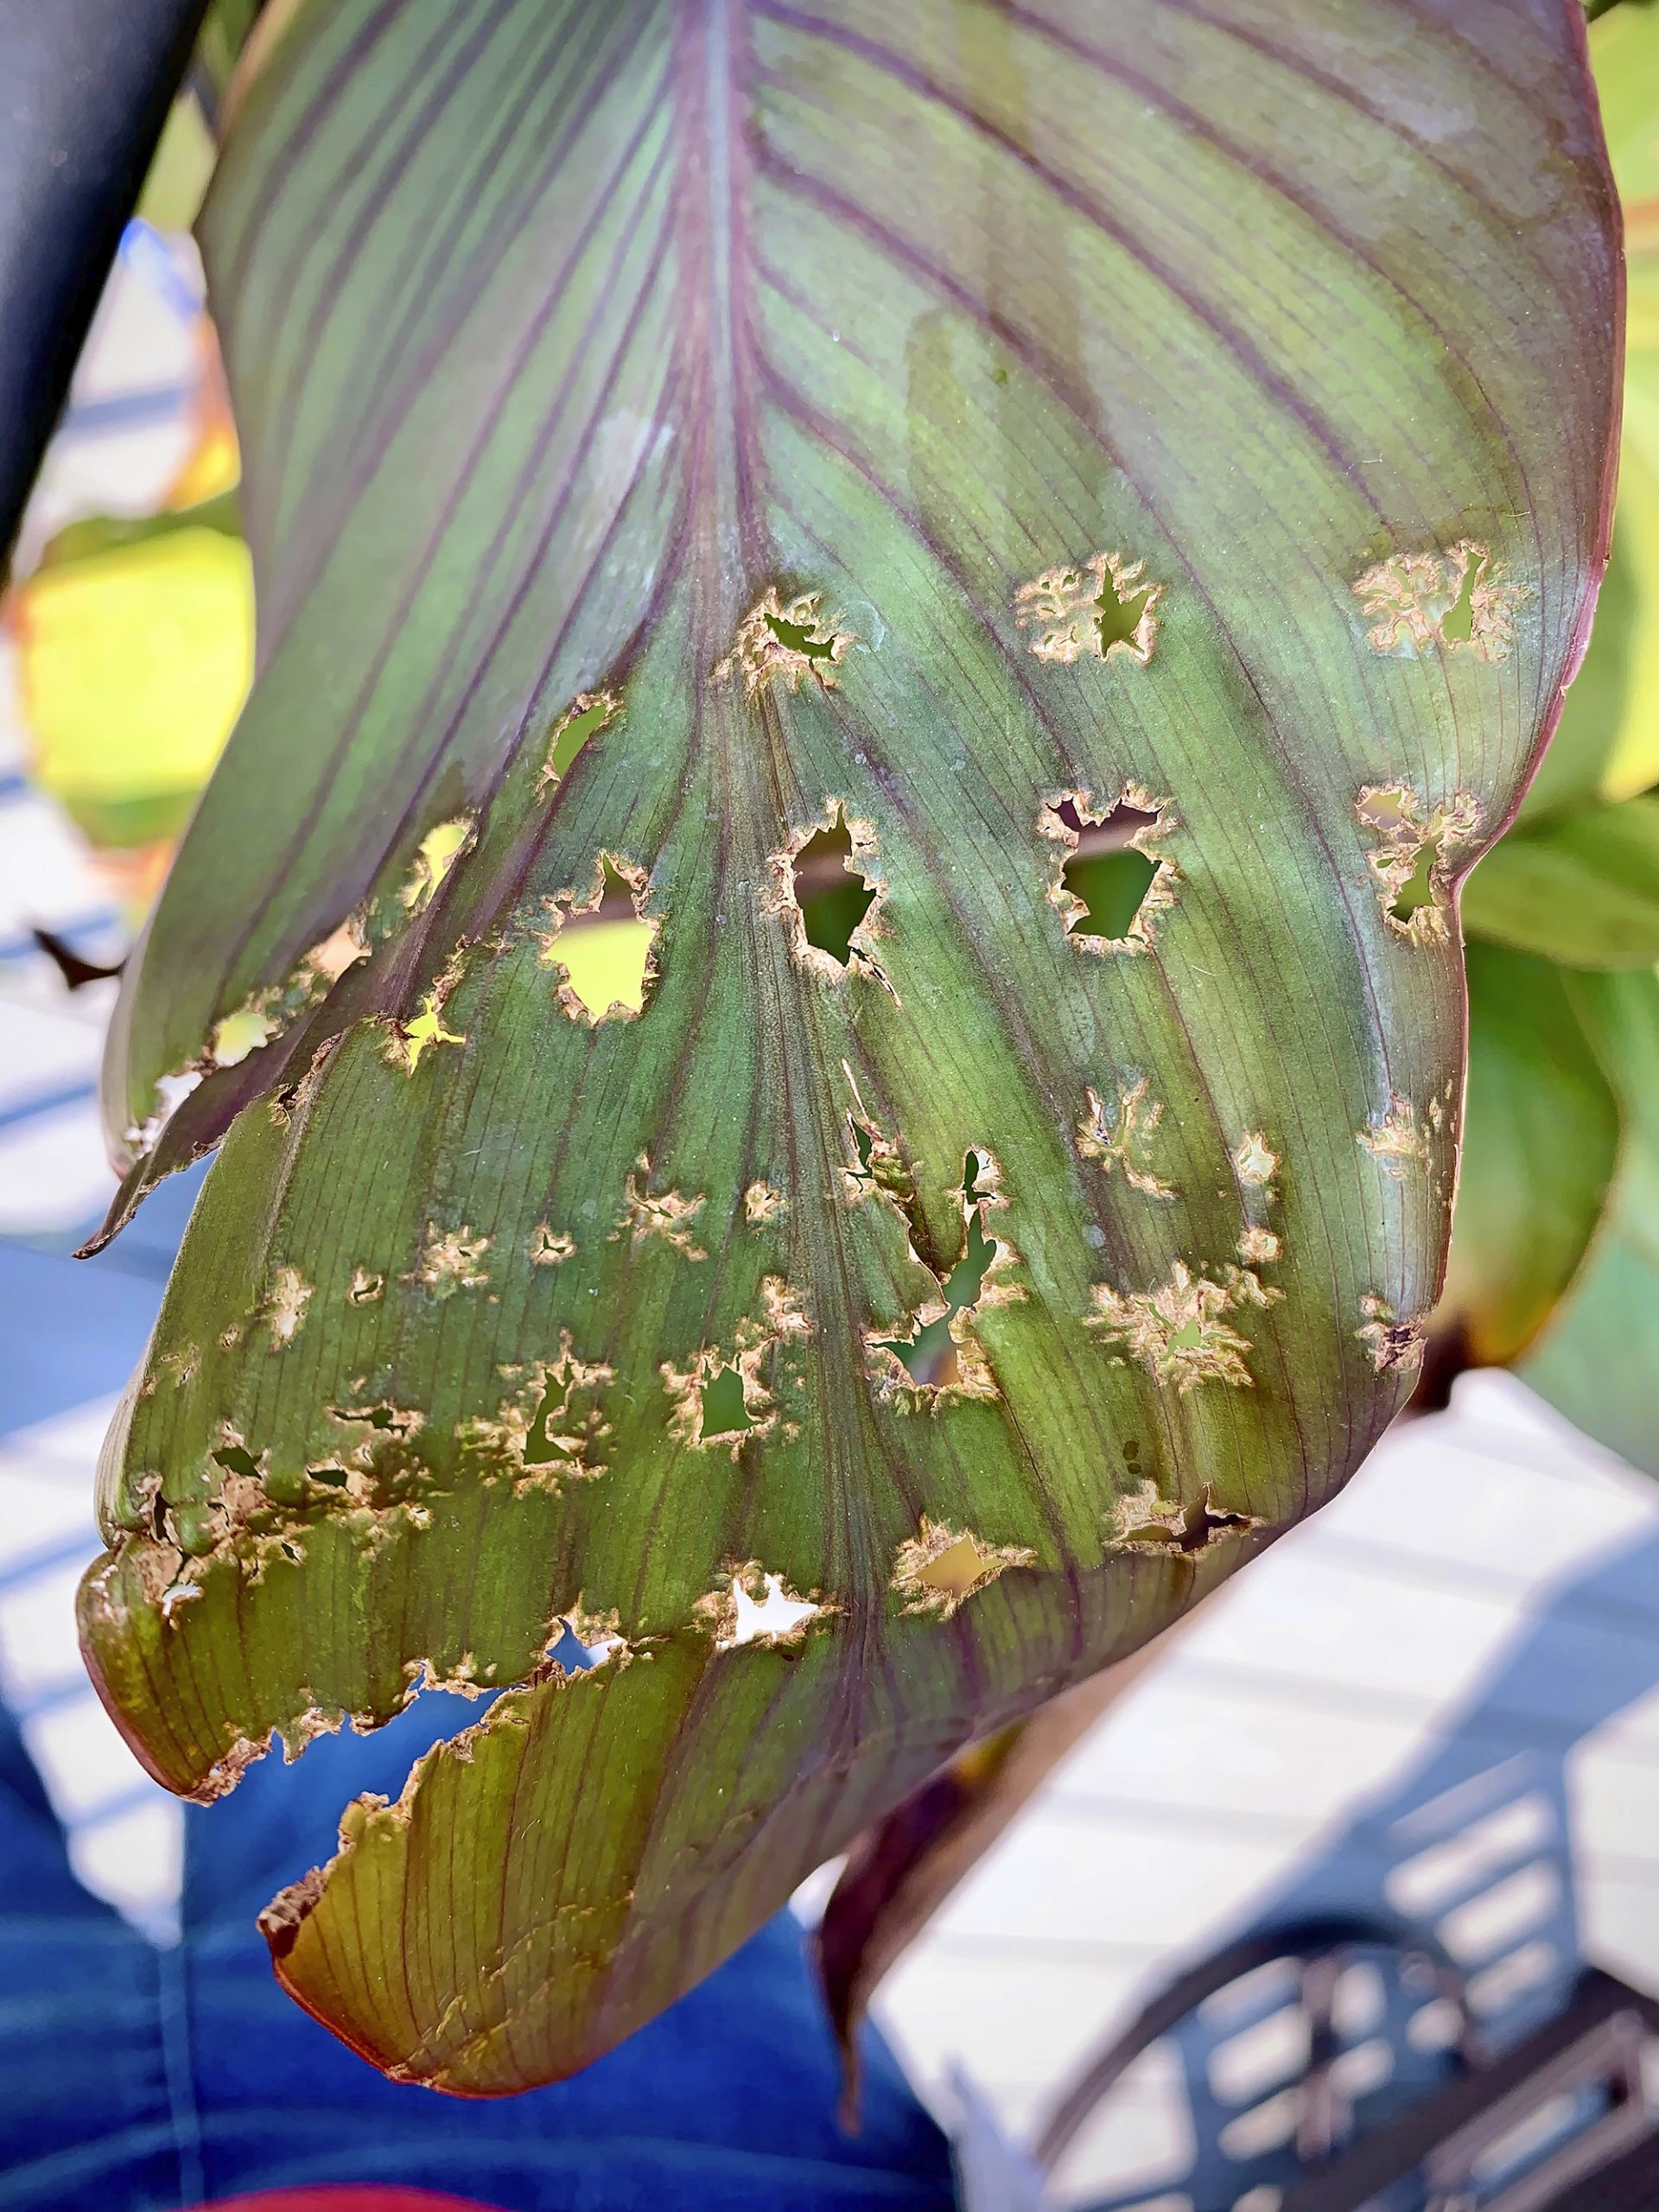 Canna Leaf Rollers Are the Bugs Eating Your Cannas